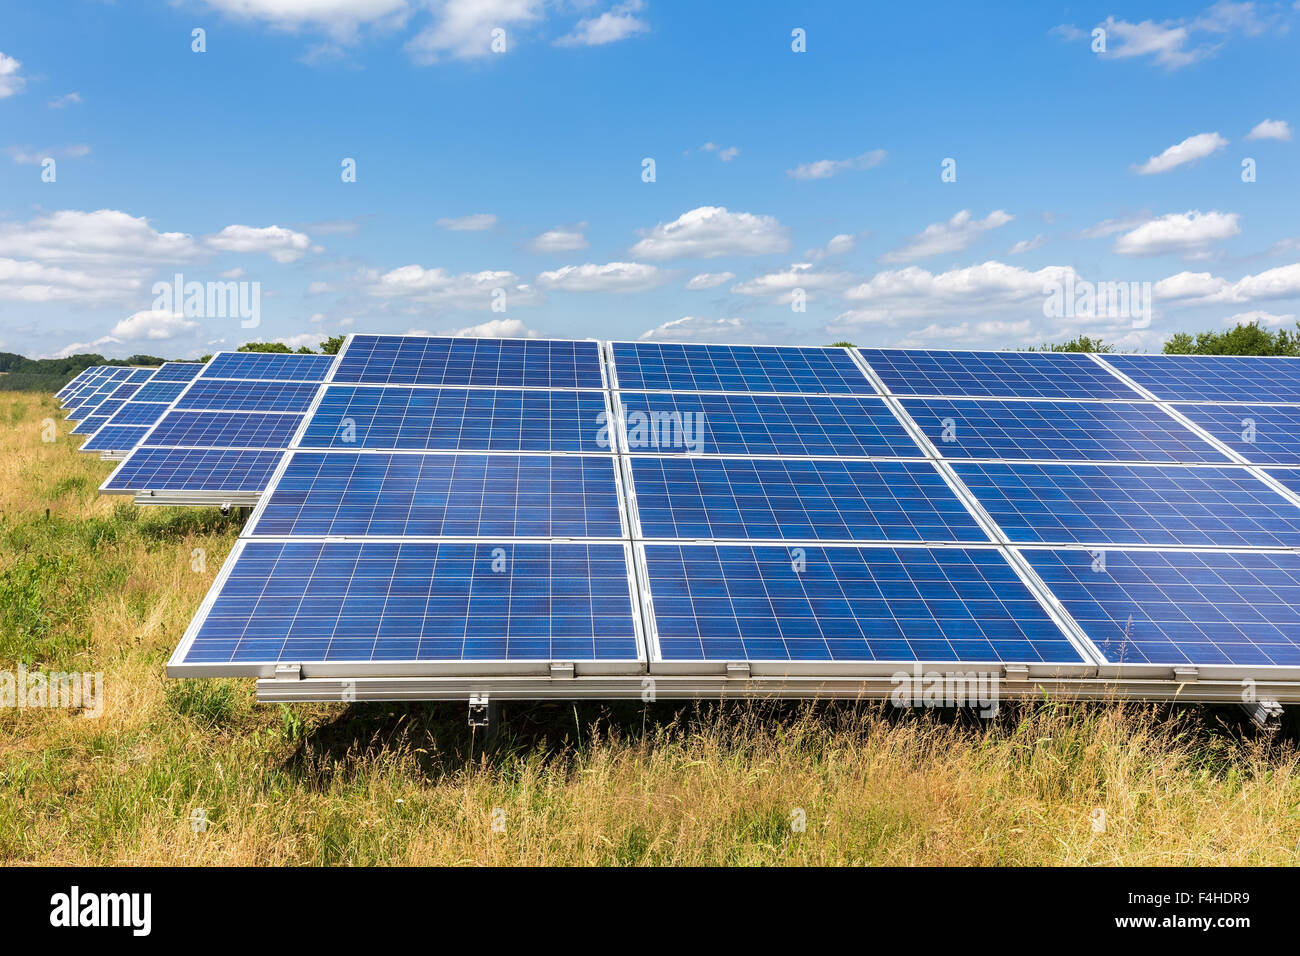 Field with rows of blue solar panels in grassland Stock Photo